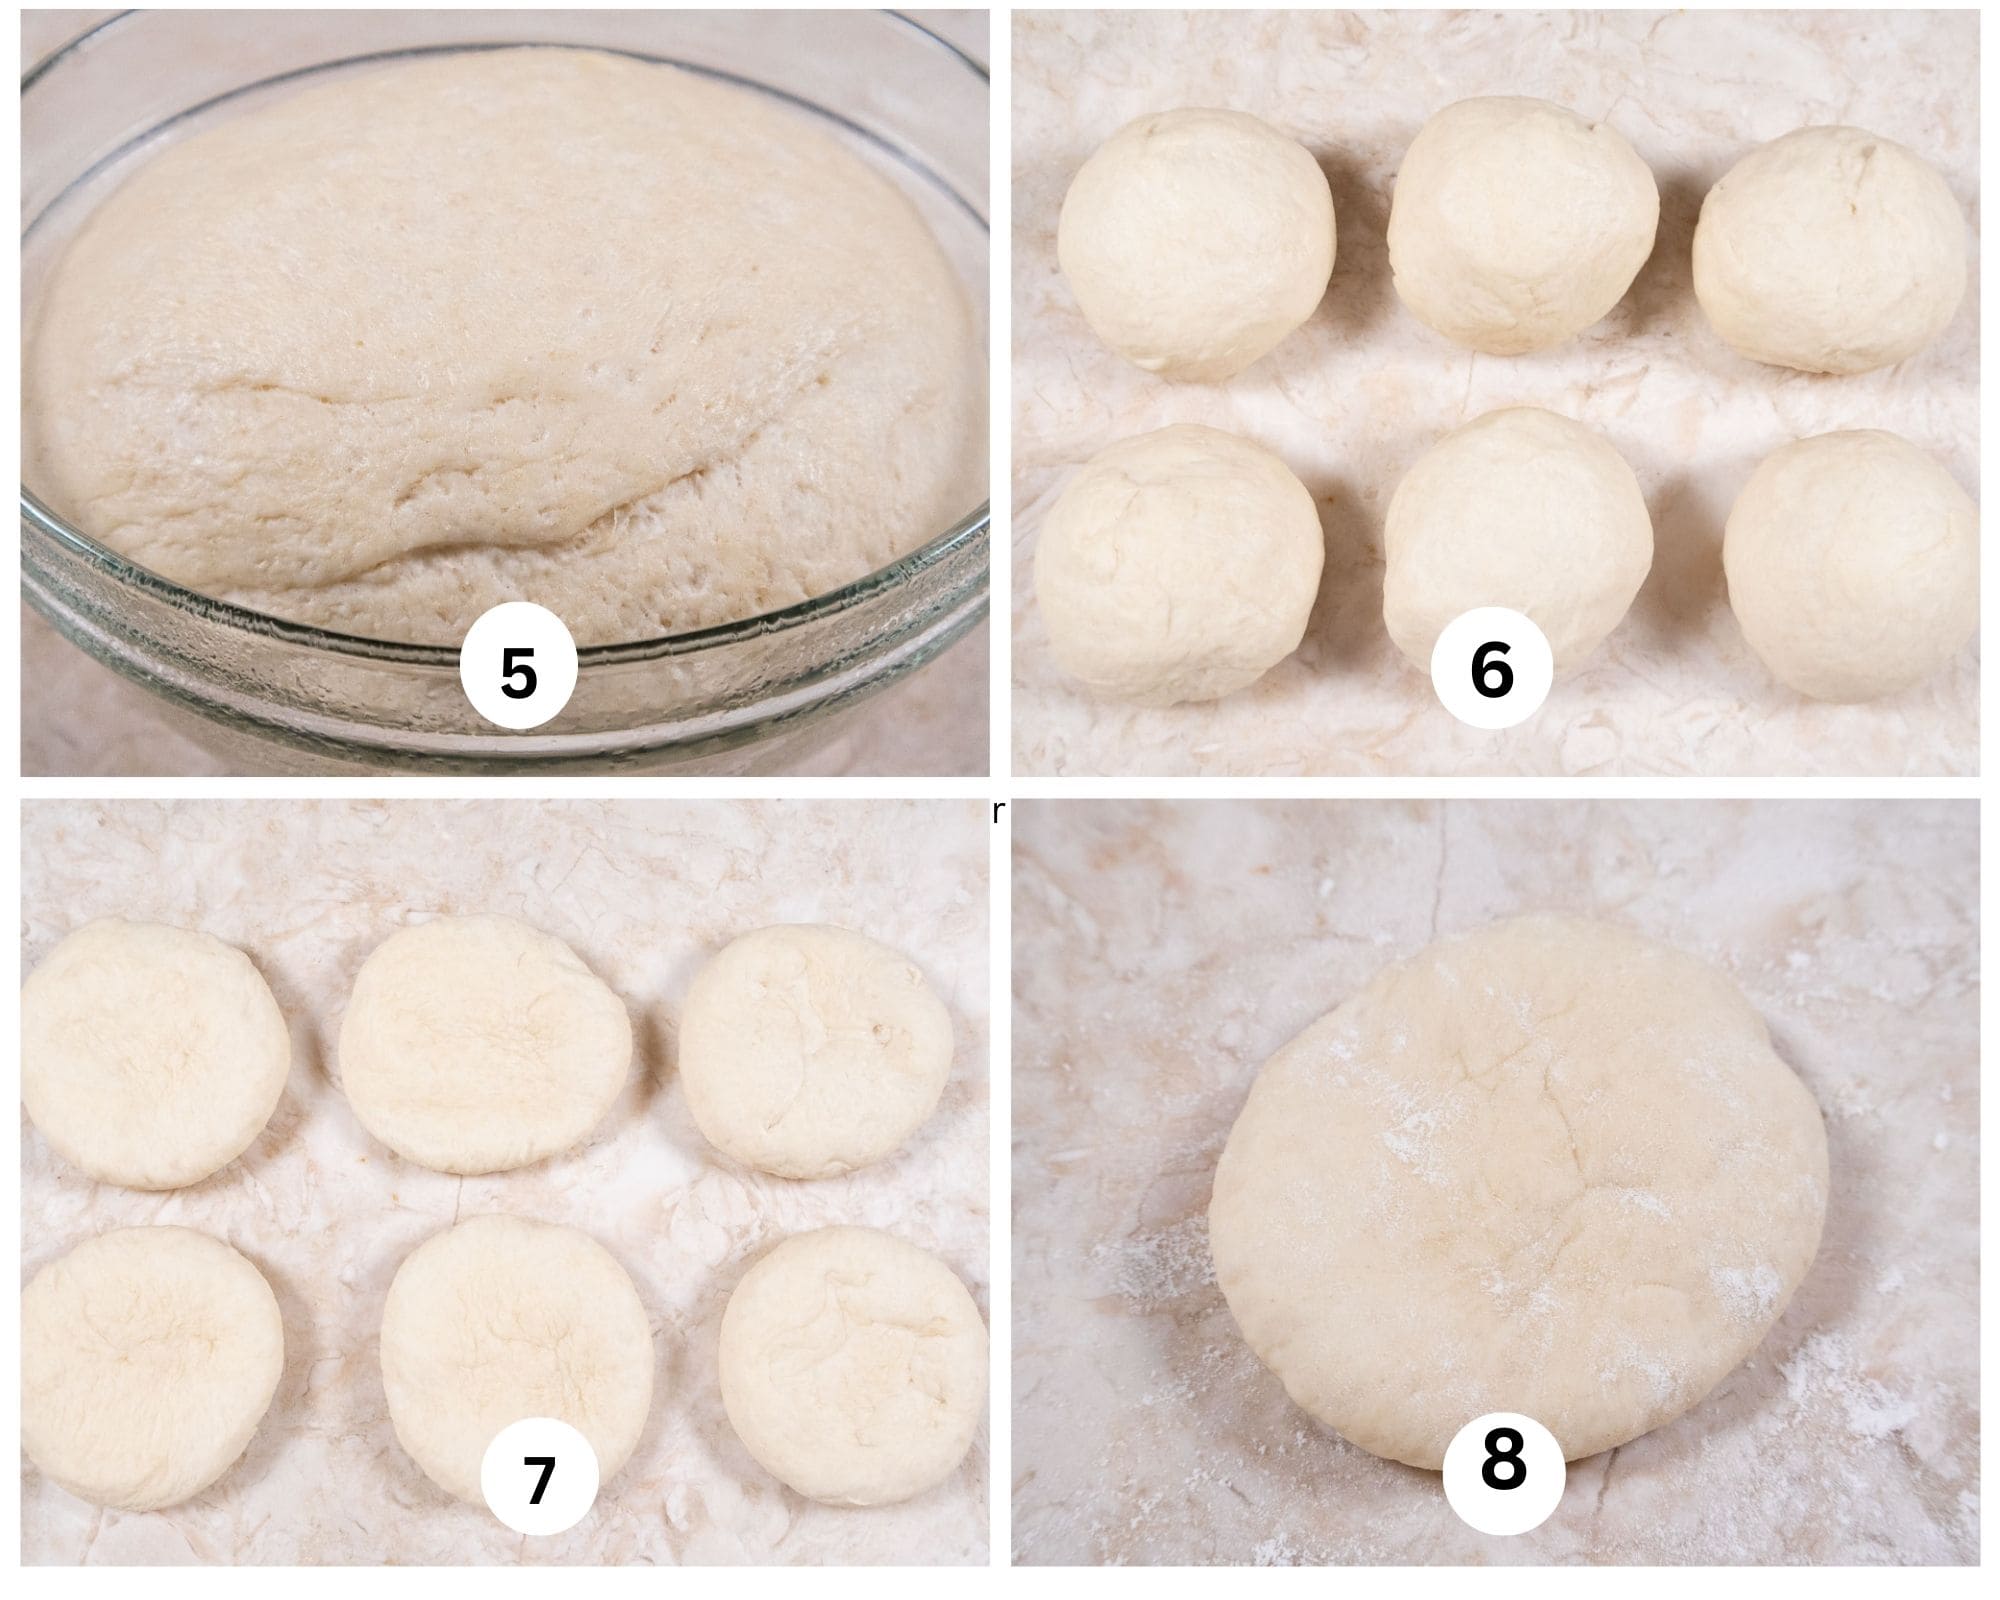 This collage shows the dough has risen, it is divided into six balls which are flattened and shows one flatten ball.